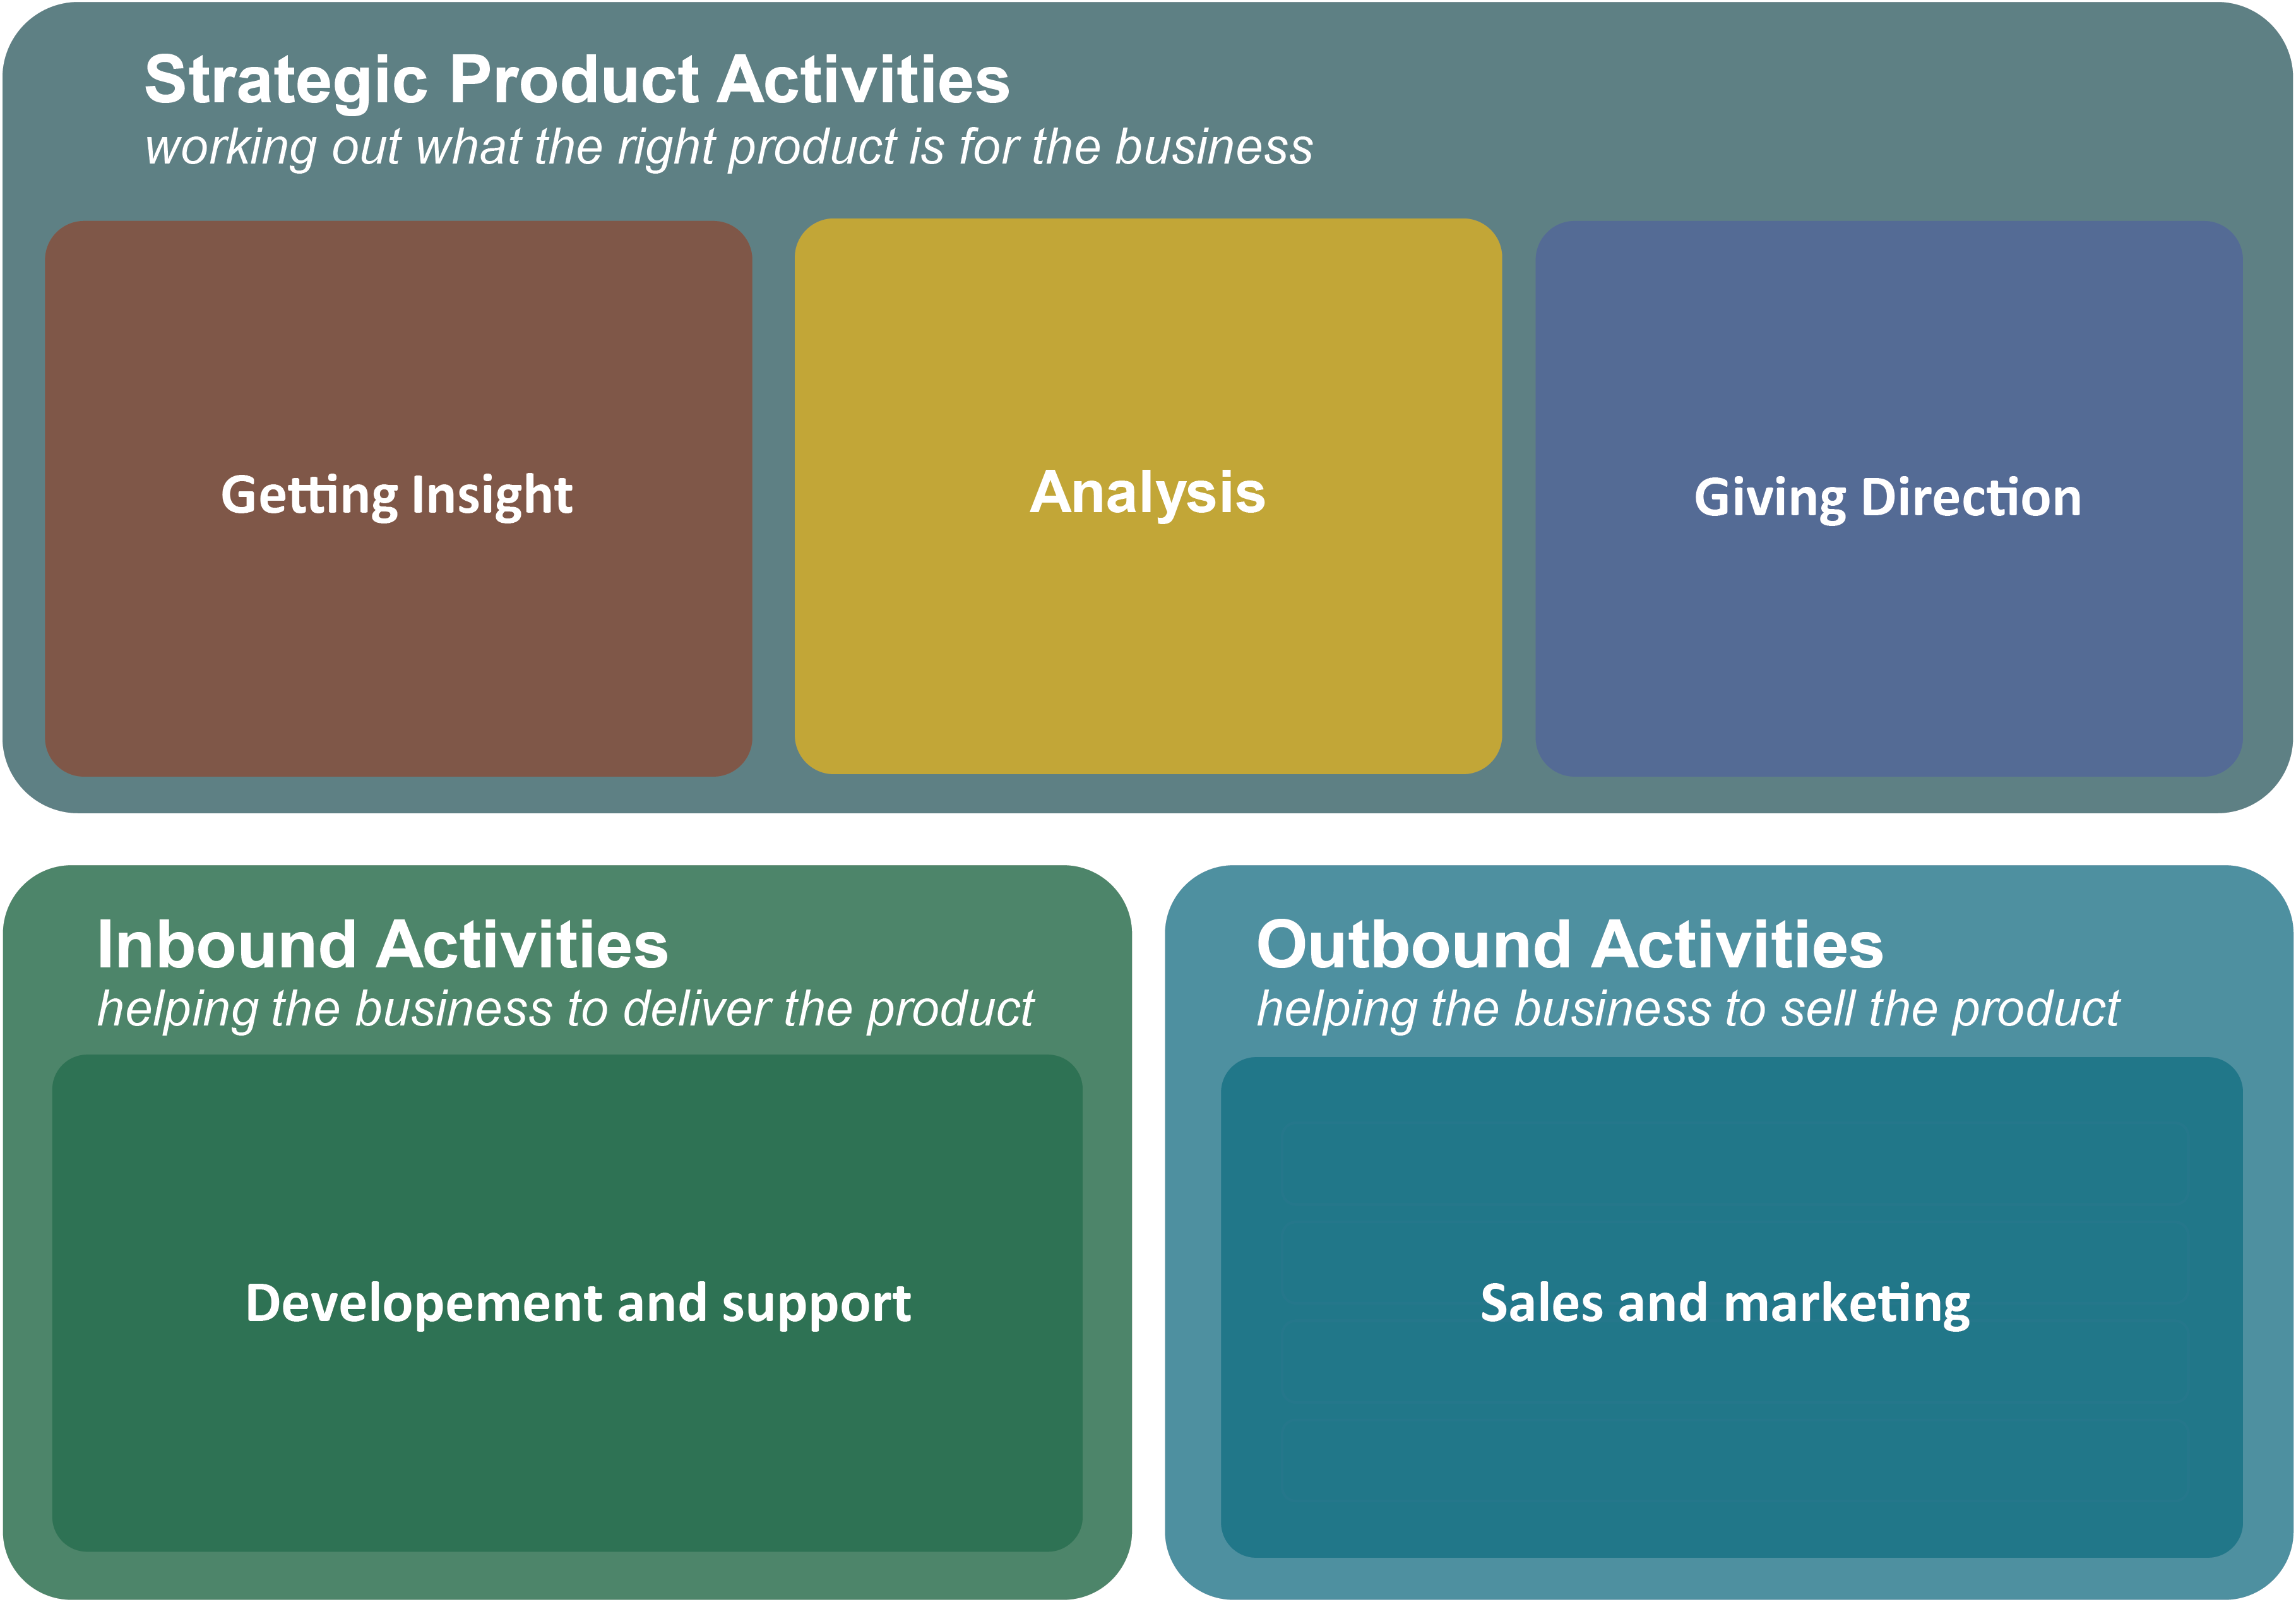 Product Activities Framework - useful when introducing product management